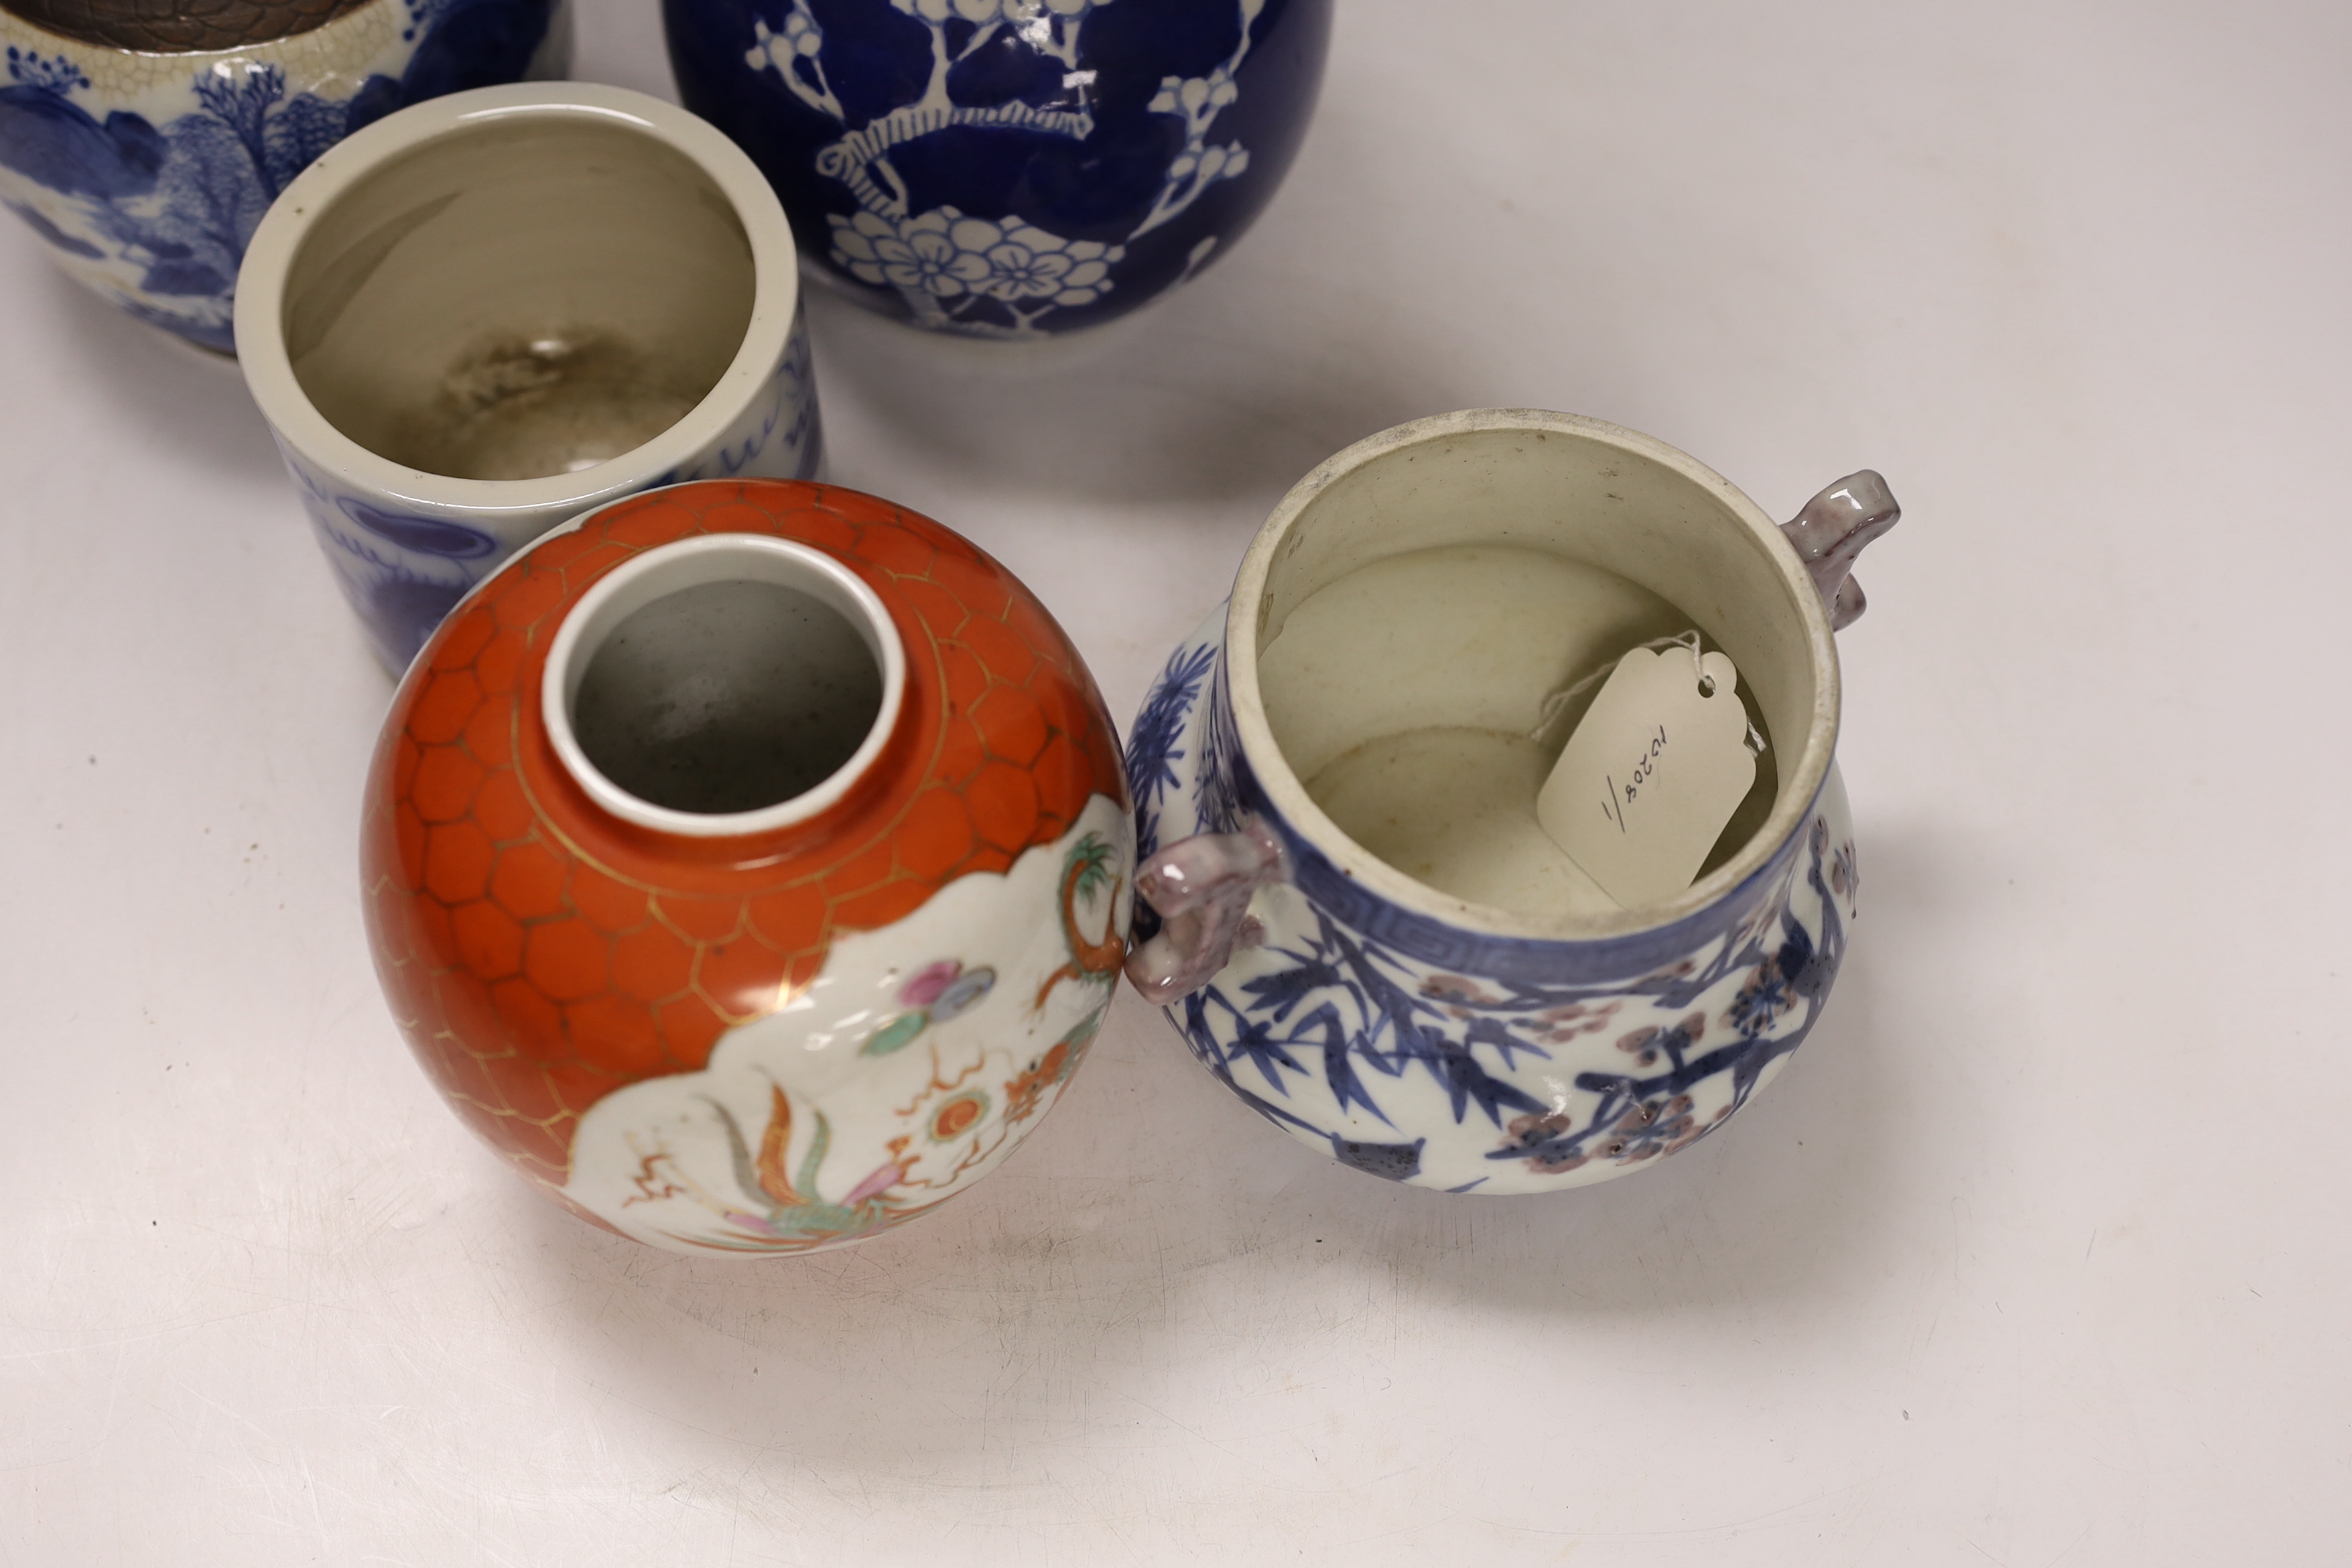 Two Chinese famille rose jars, similar pot with cover, brush pot and a vase, 18th century and later, tallest 24cm (5)